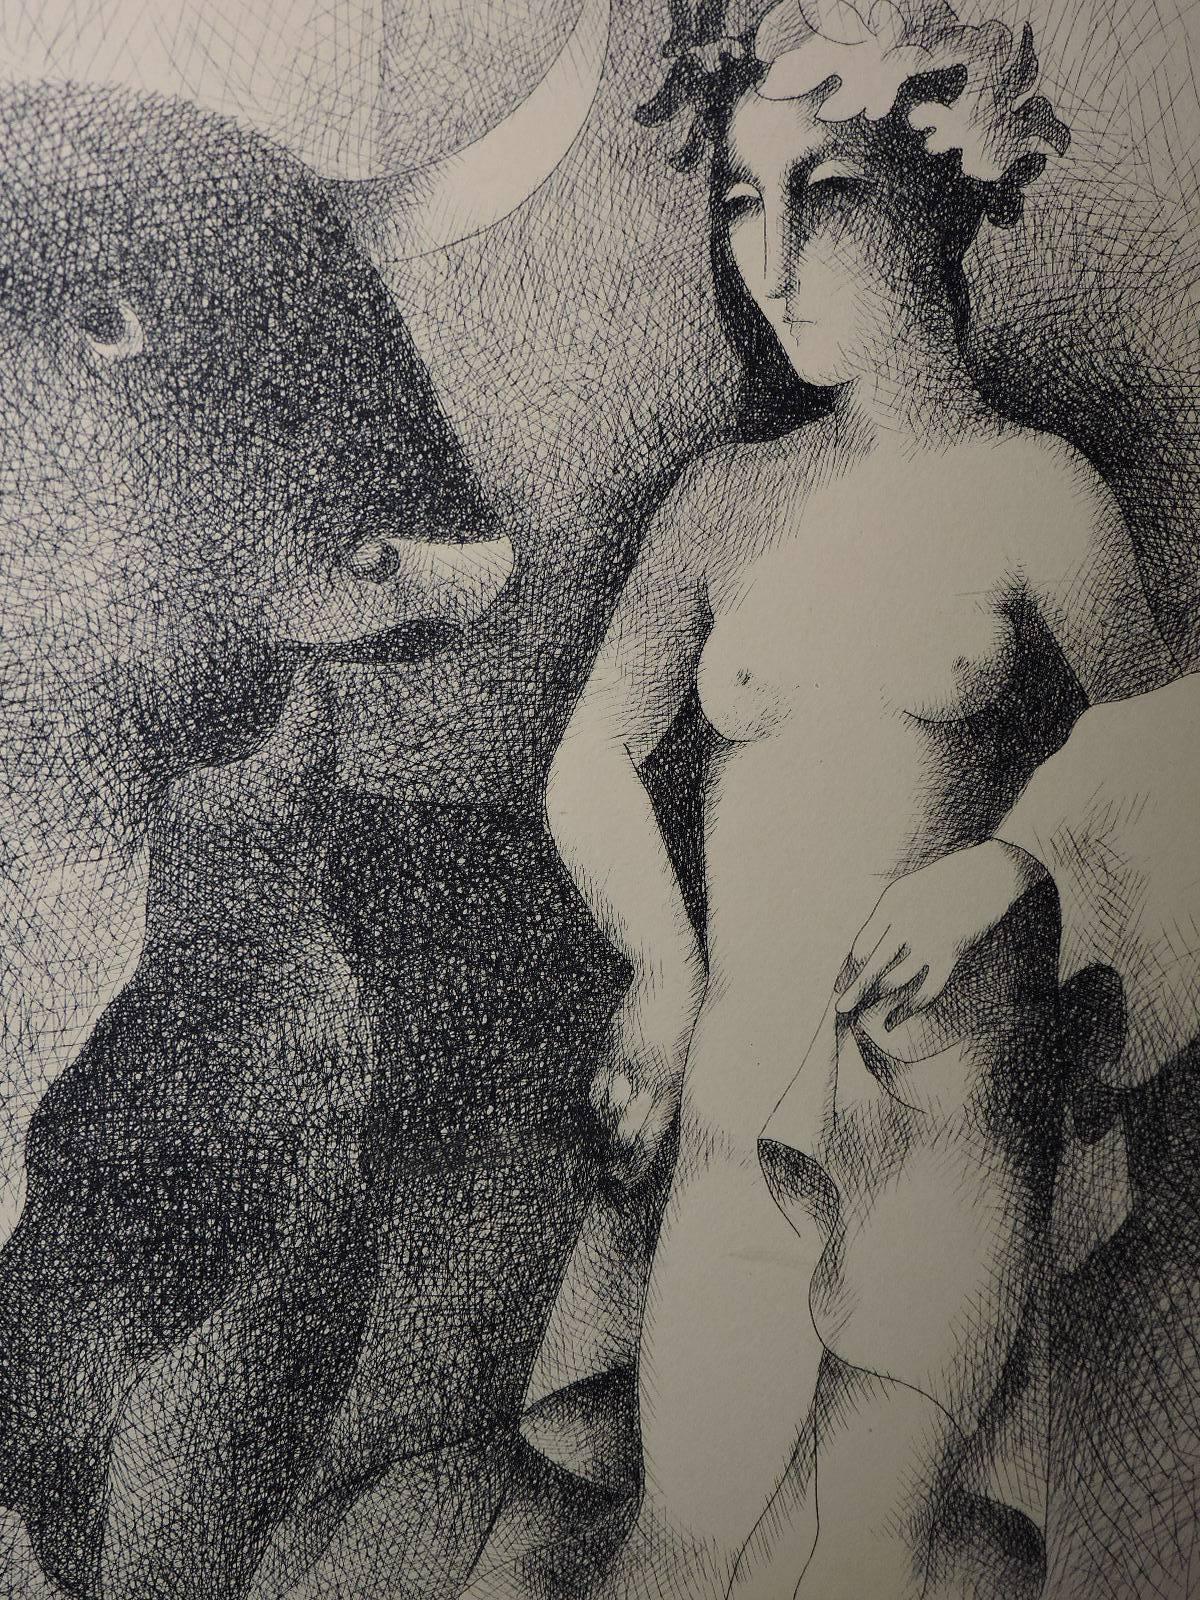 Bacchanalian Lithograph style of Picasso 4